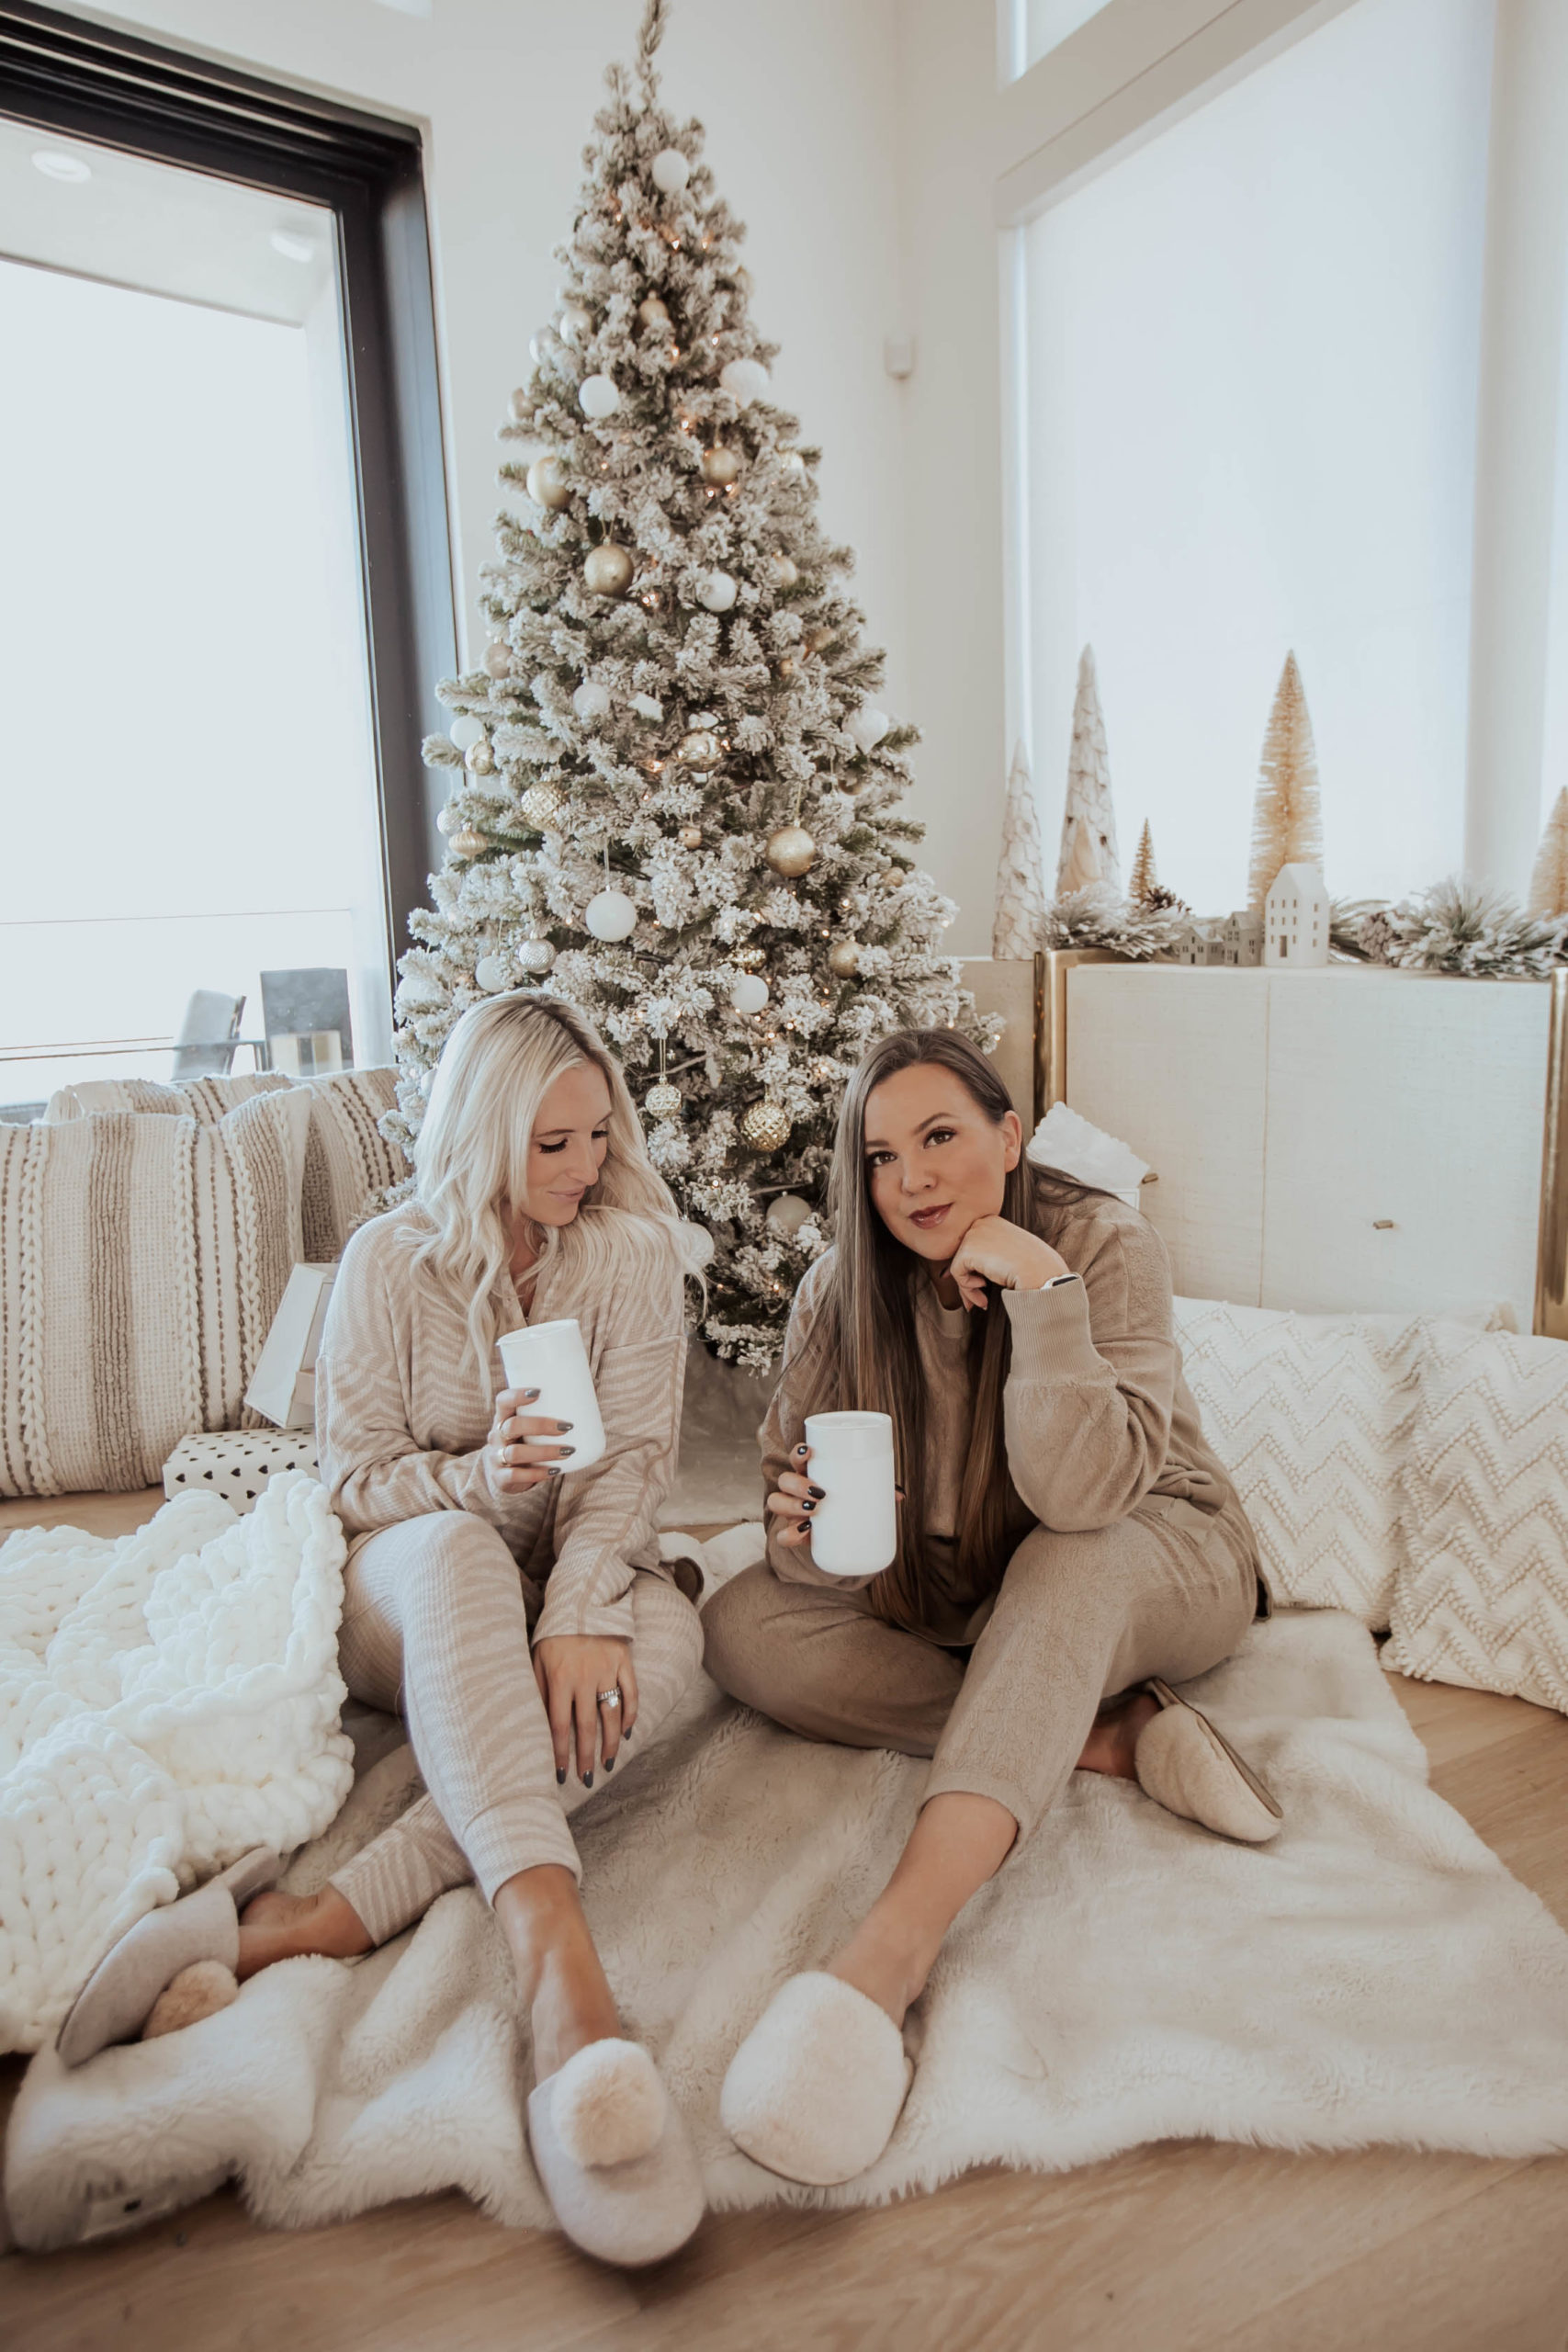 Reno bloggers Ashley Zeal and Emily Wieczorek of Ashley and Emily Blog share their 2020 gift guide under 50 ft the best gifts under $50.